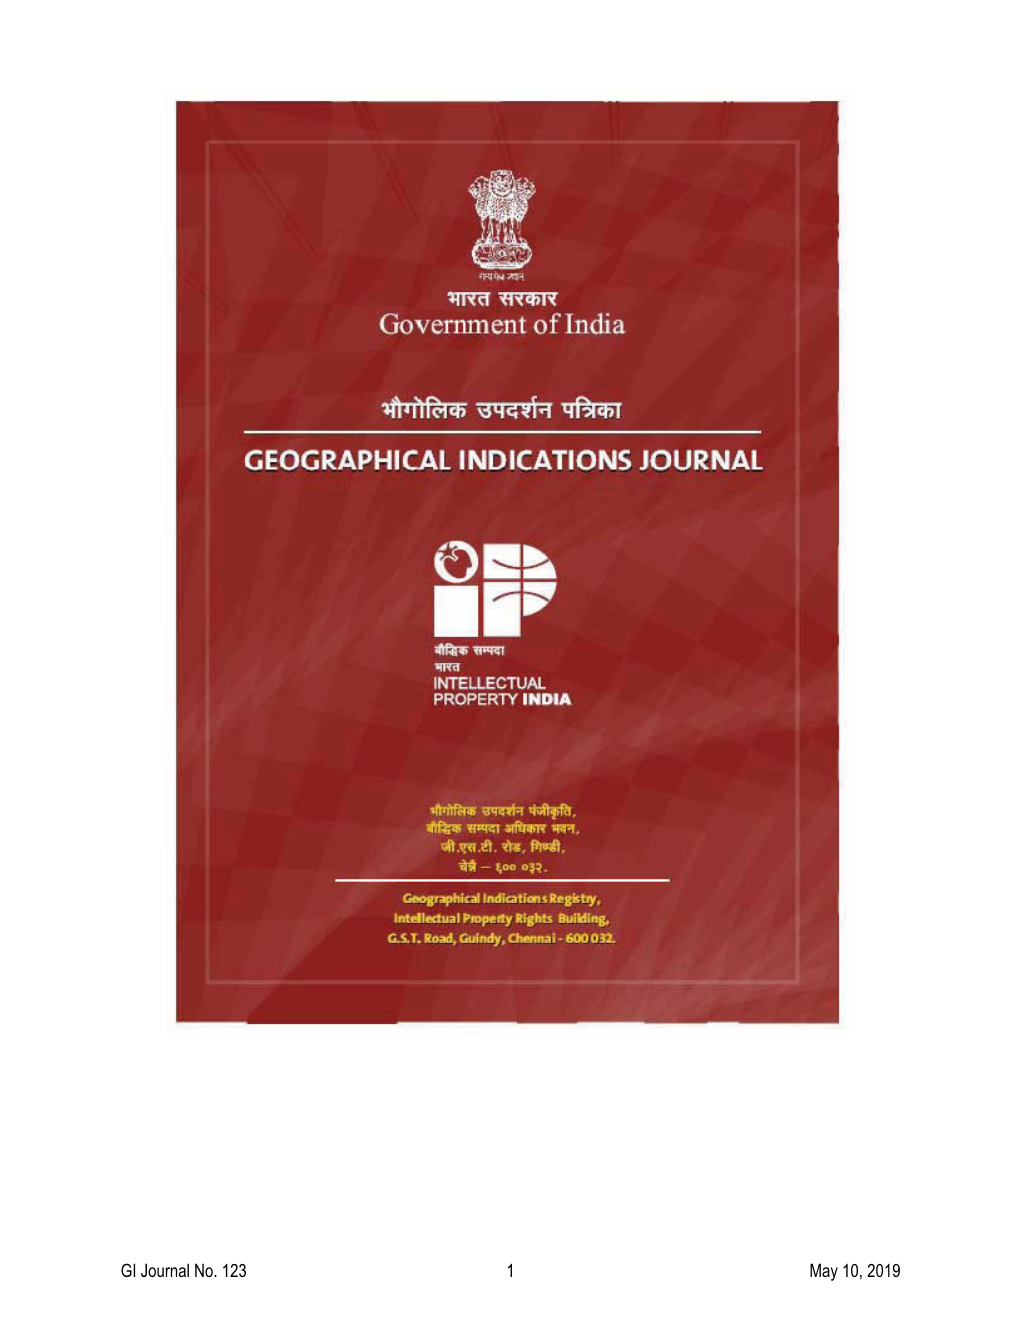 Government of India Geographical Indications Journal No. 123